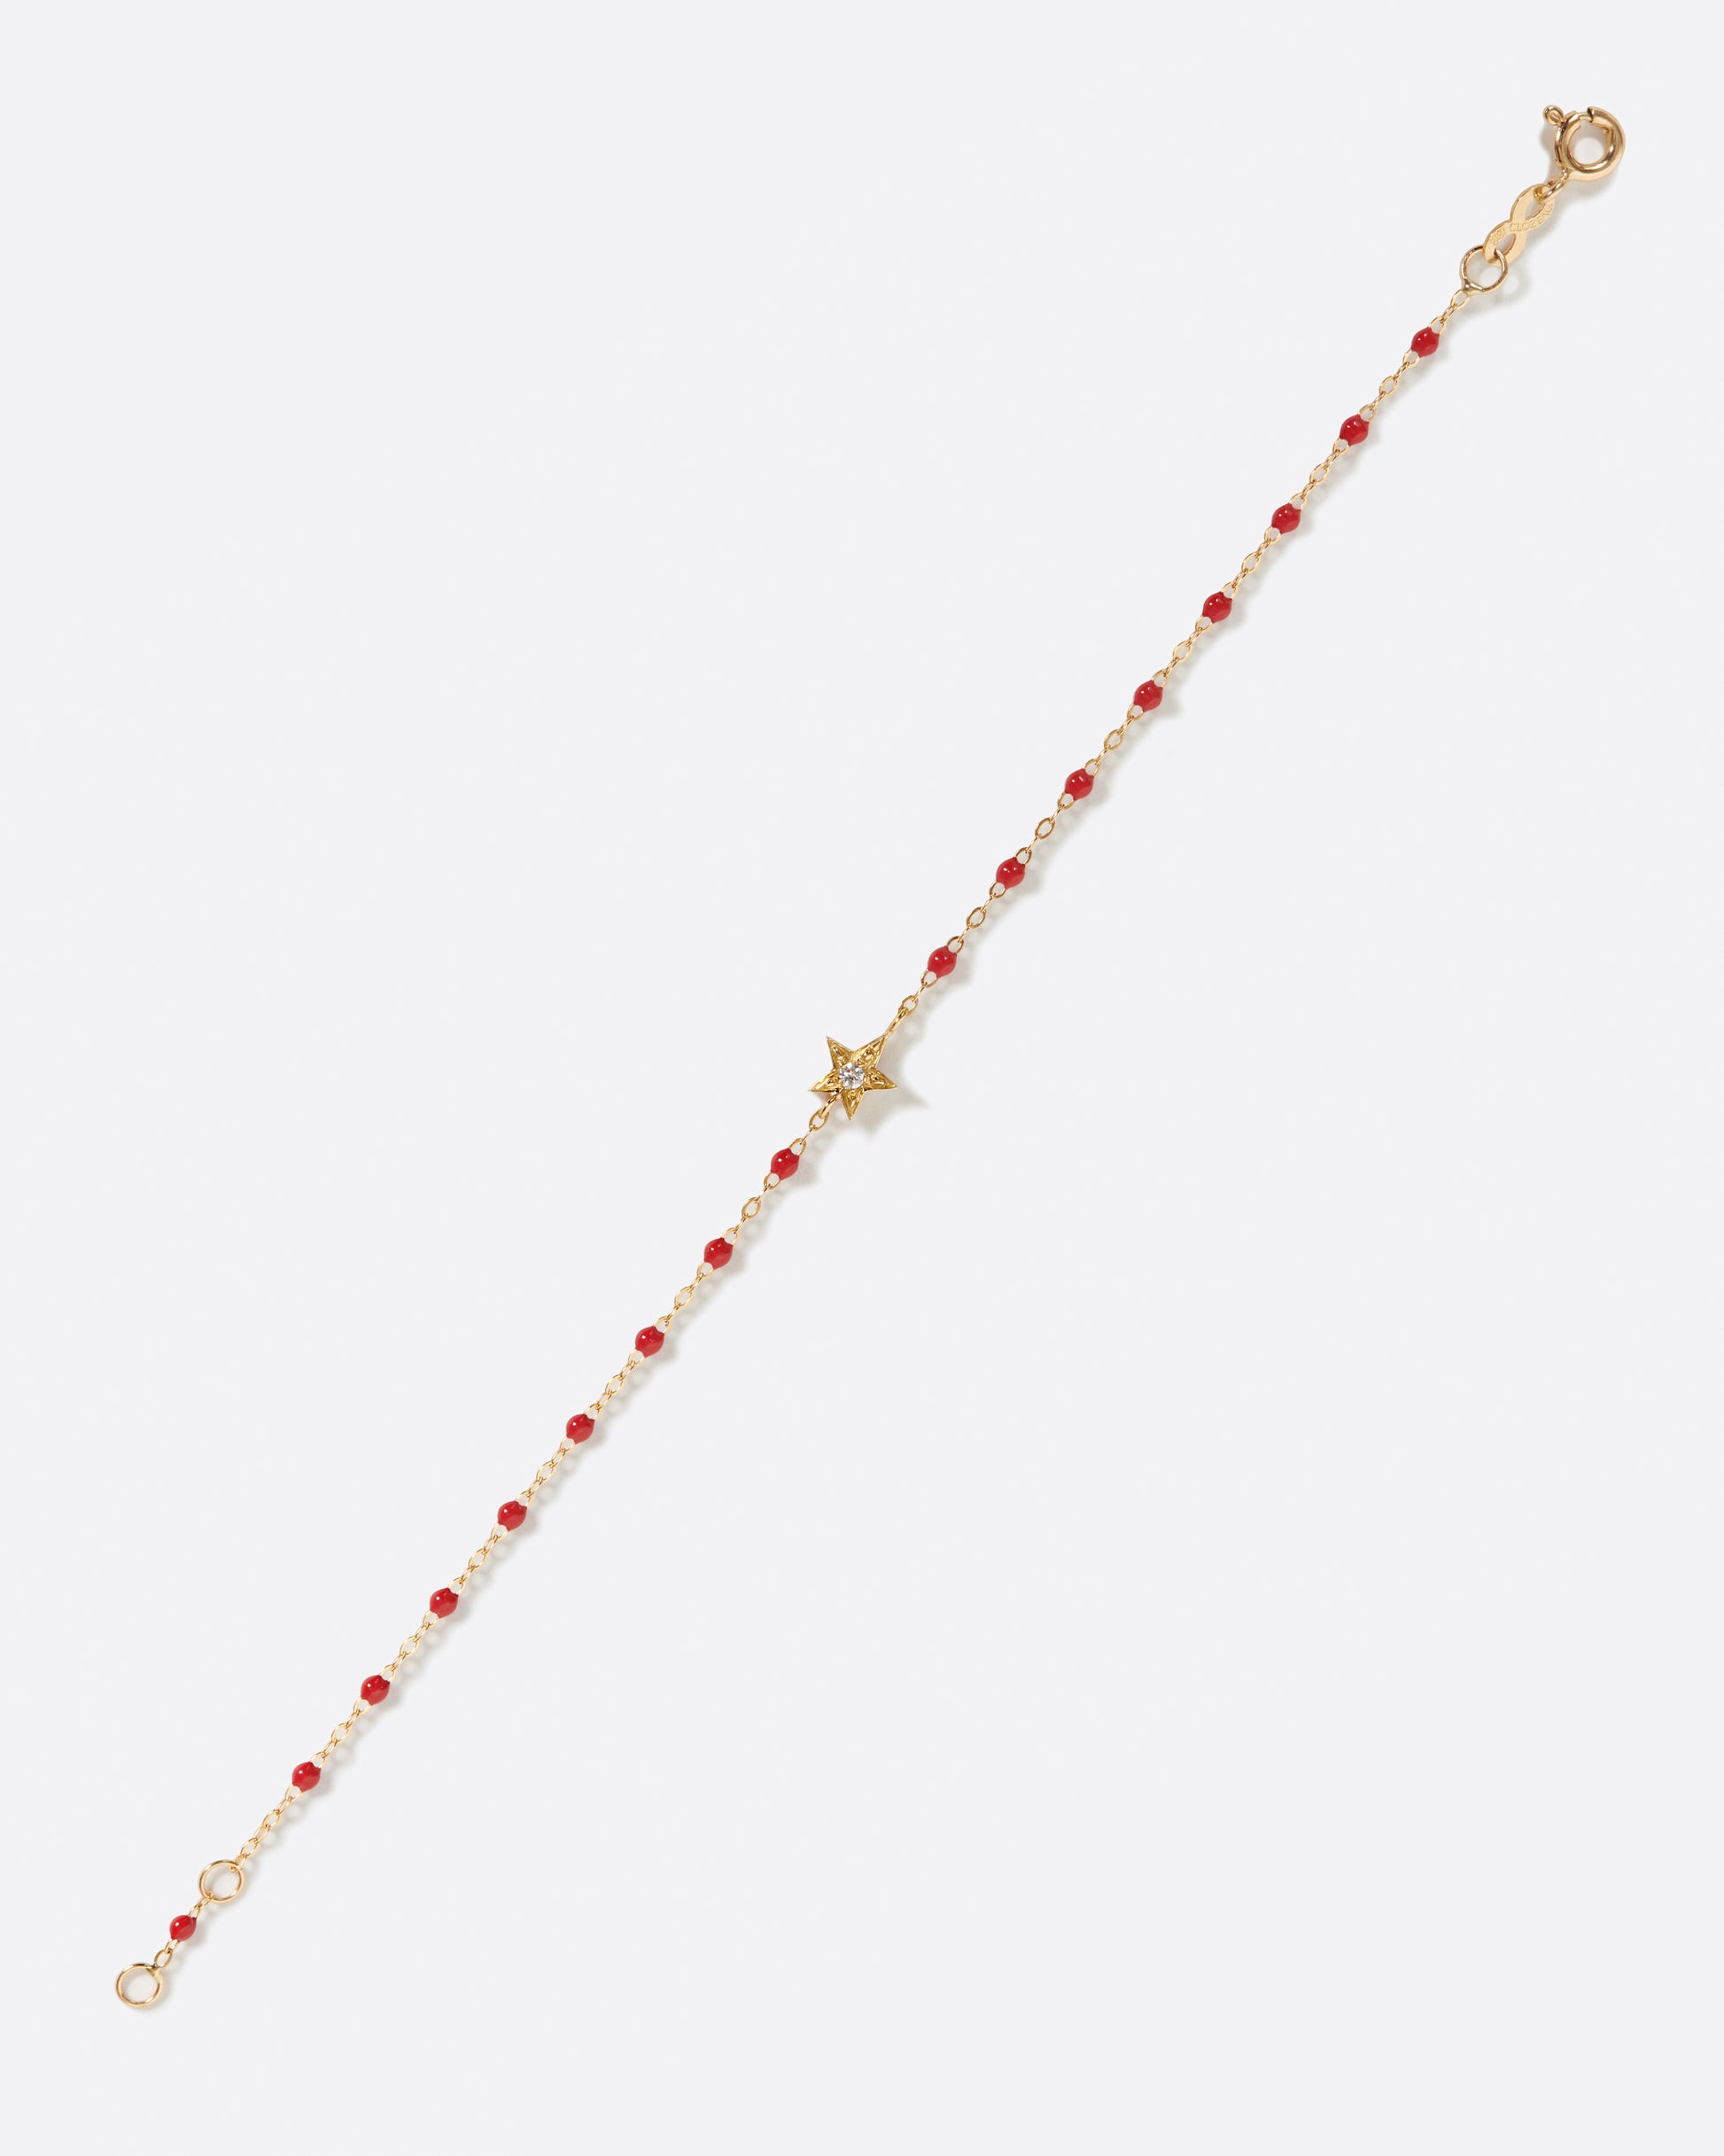 A classic Gigi Clozeau bracelet with poppy red resin and a five point star at its center.